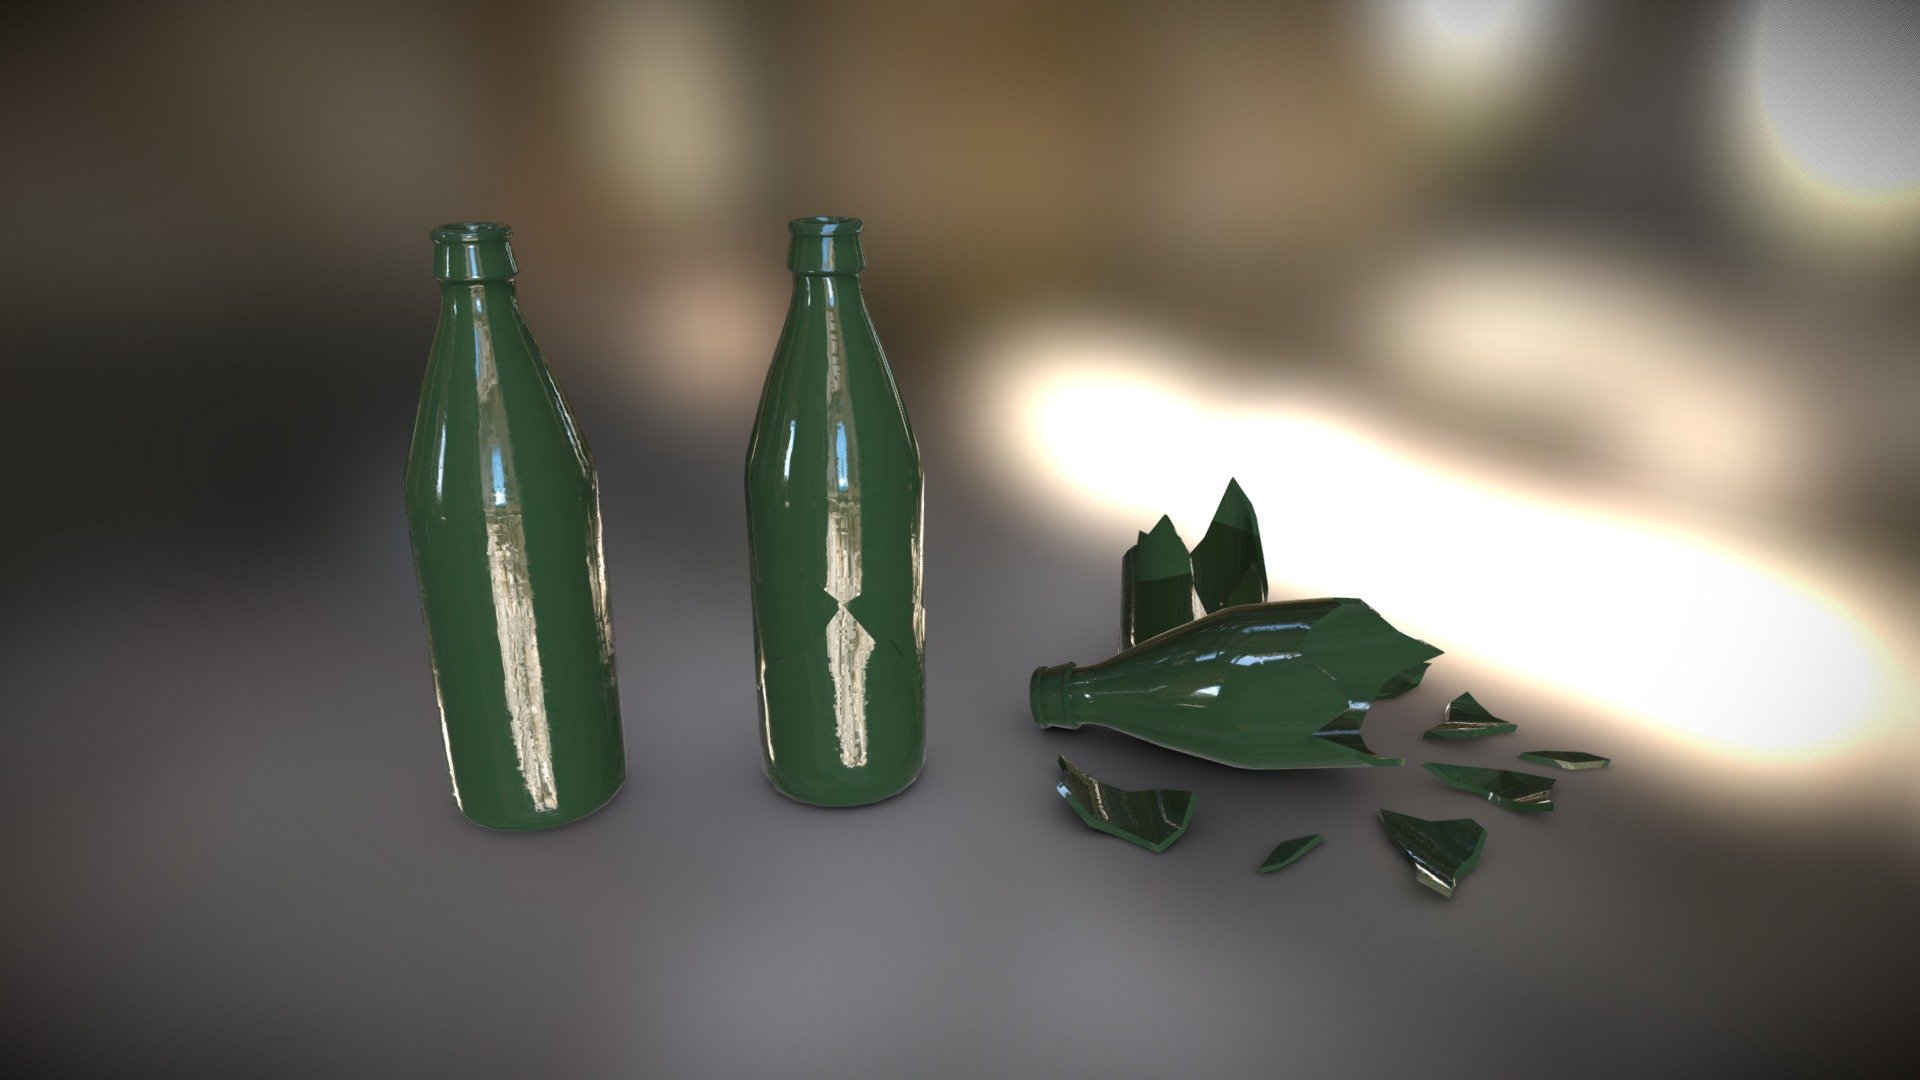 3 groups of models: 1) whole 2) Broken bottle assembled 3) Broken bottle lying on the floor. One set of textures for all models. For greater compatibility with various 3D engines, transparency or refraction cards are not used.

Real scale - Units: cm - (Proportions and sizes are observed and as close as possible to the real object): Whole Bottle ~7 x 7 x 23 cm.

Formats:




.blend (Mesh + material (Principled BSDF) + Textures PBR - Roughness/Metallic) - Blender (ver. 3.0.1)

.max (Mesh + material (Vray 3.60.03) + Textures Specular/Glossiness) - 3ds Max 2018

.tbscene (Mesh + Textures PBR - Roughness/Metallic, Marmoset Toolbag 3 (Ver 3.08))

.FBX (only mesh! without materials/textures)

.glb (Triangulated, Mesh + Textures PBR Roughness/Metallic (compressed in format))

.gltf (Triangulated, Mesh + Textures PBR Roughness/Metallic - .jpg )

.unitypackage (Triangulated, Mesh + Textures - .tga)

.zip (folder textures, PBR Roughness/Metallic)

.zip (folder textures, PBR Specular/Glossiness)
 - Broken and Whole Bottles - 3D model by Grishmanovskij Anton (@GrishmanovskijAnton) 3d model